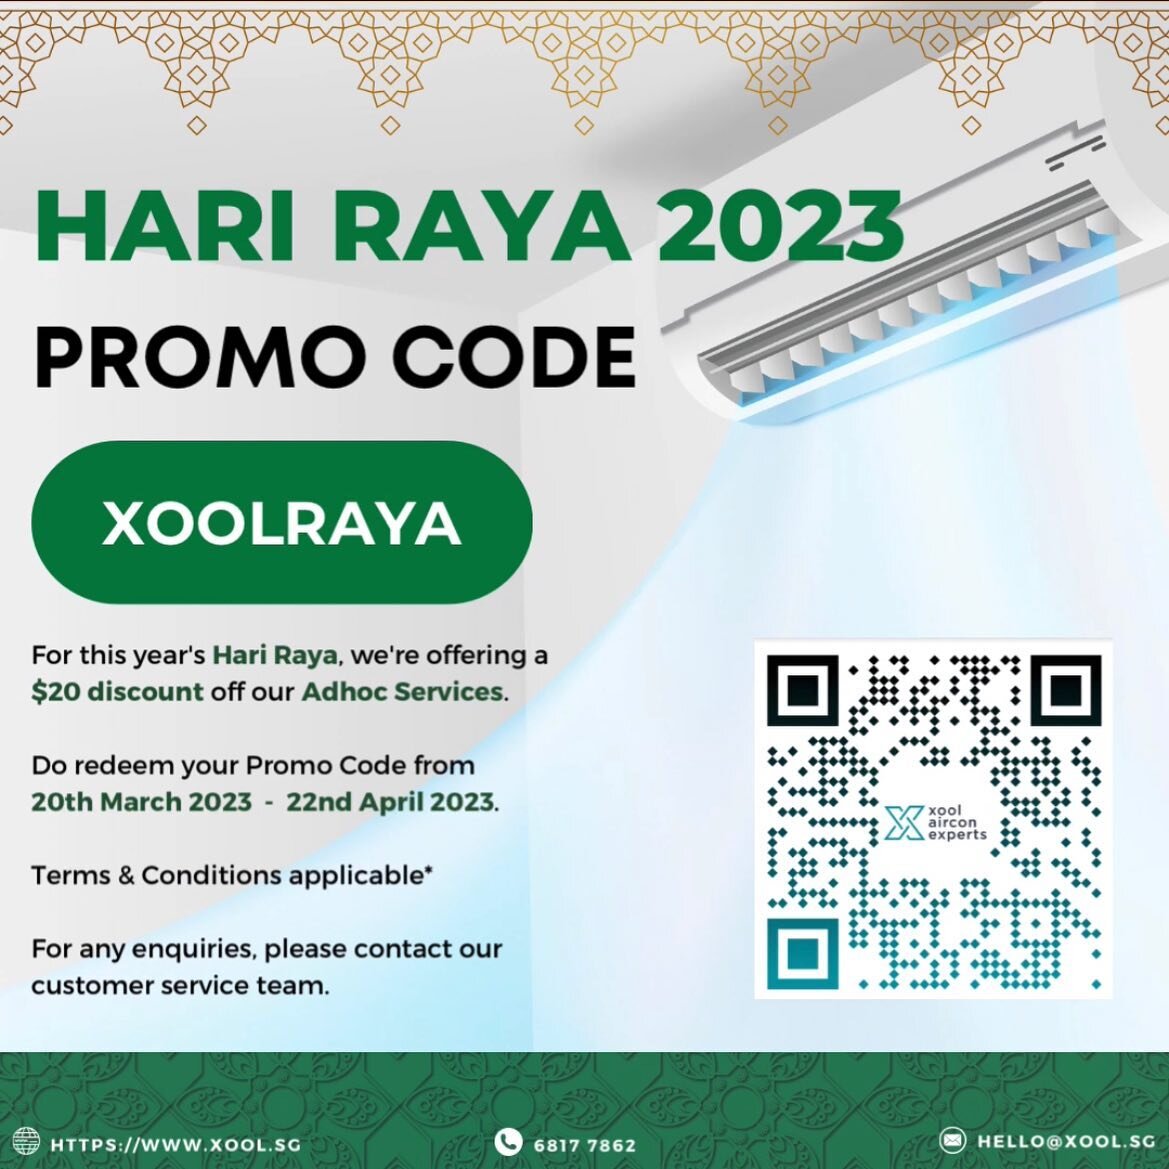 ☪️HARI RAYA 2023☪️

Use promo code &quot;XOOLRAYA&quot; to redeem your $20 discount on our Adhoc services.

Do redeem it by 22nd April 2023. 

✅ Apply for a fast - easy online booking and payment system with us

✅ Leave your home or office clean afte